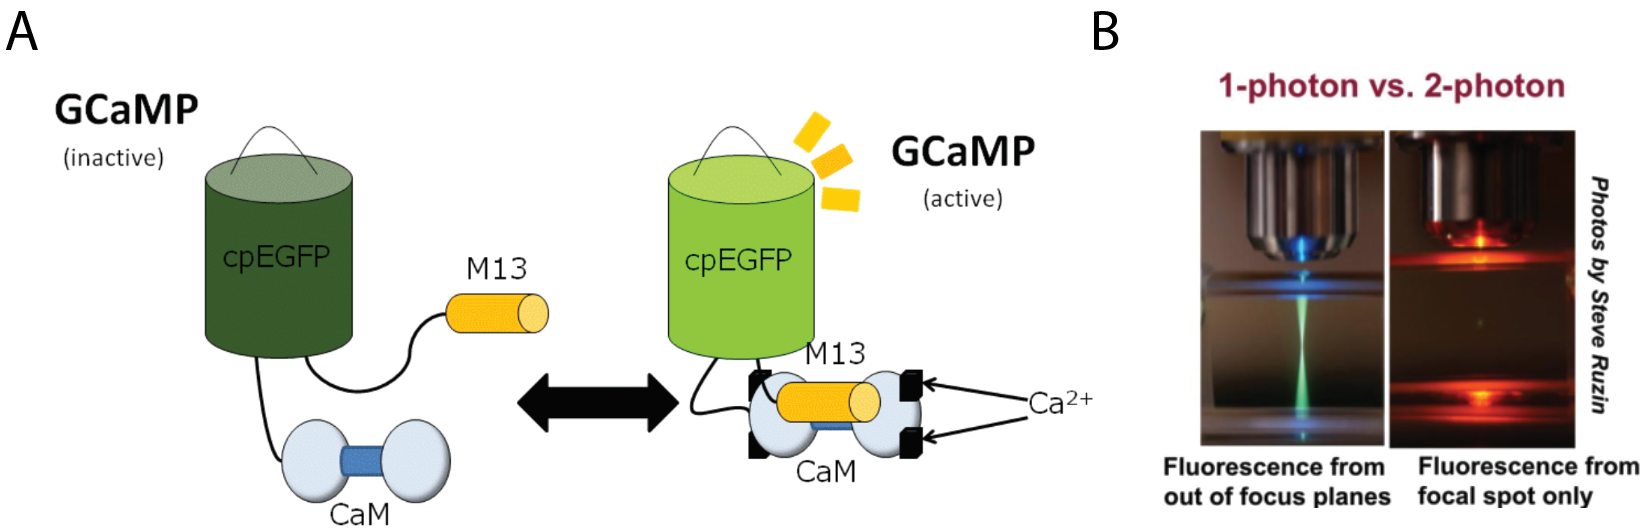  Two-photon imaging of the calcium indicator GCaMP